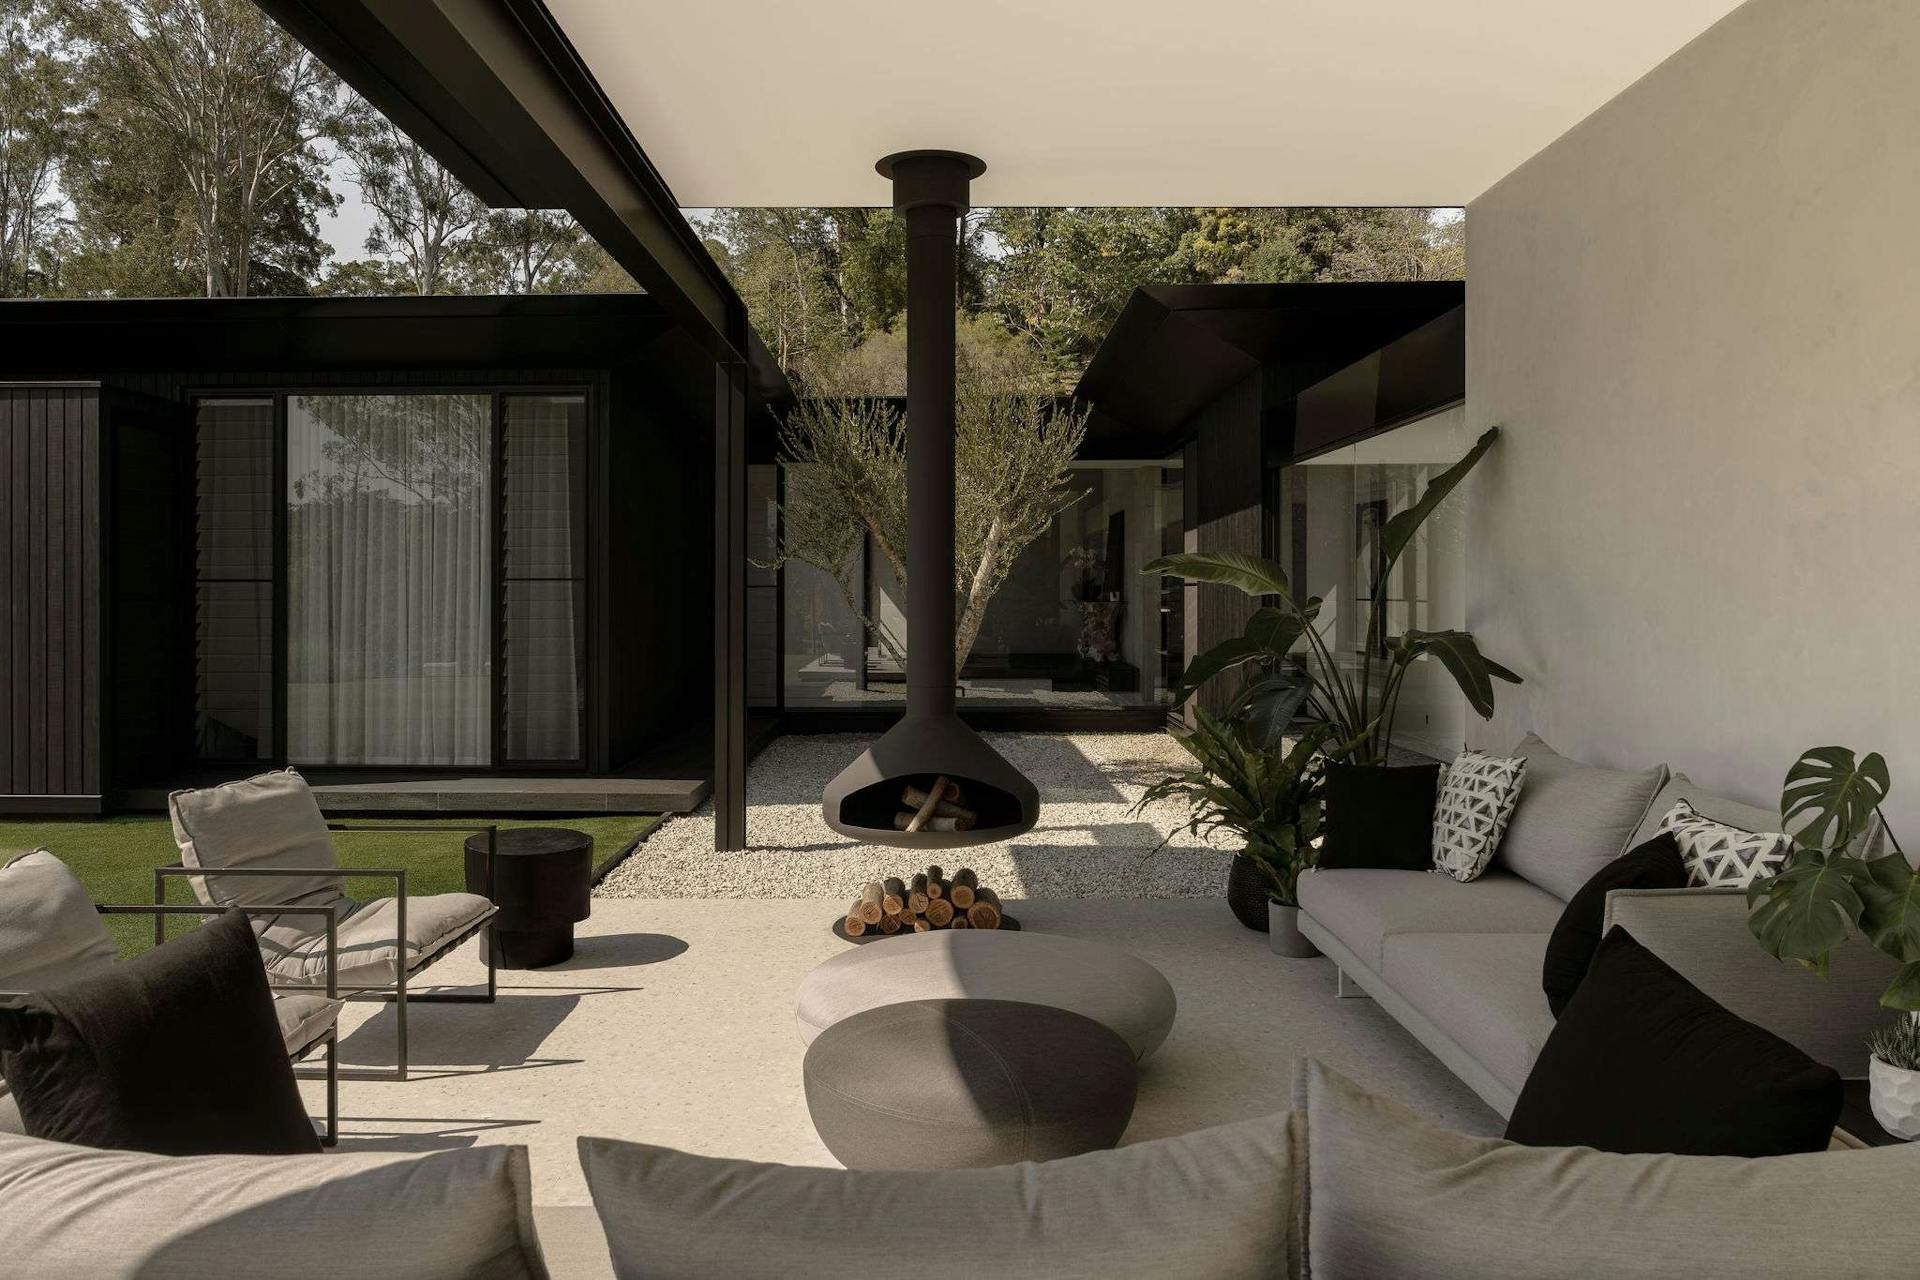 Blackwood Doonan by Sarah Waller Architecture. Photography by Alyne Media. Outdoor living area with freestanding black fireplace and grey sofas.